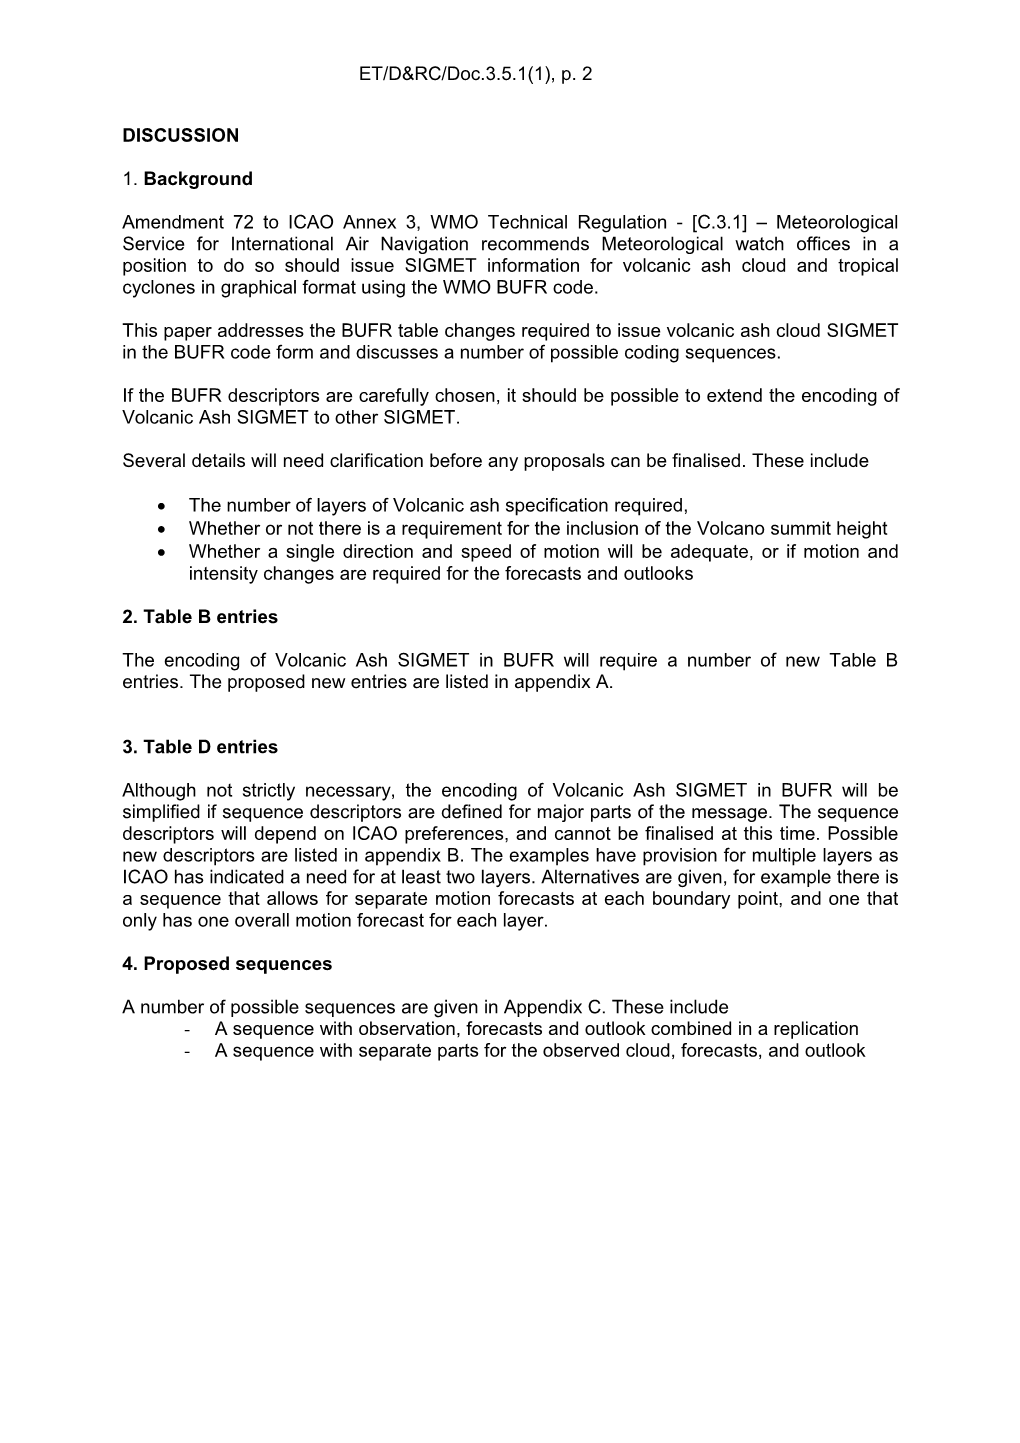 Draft Proposals for the Representation of Volcanic Ash SIGMET in BUFR